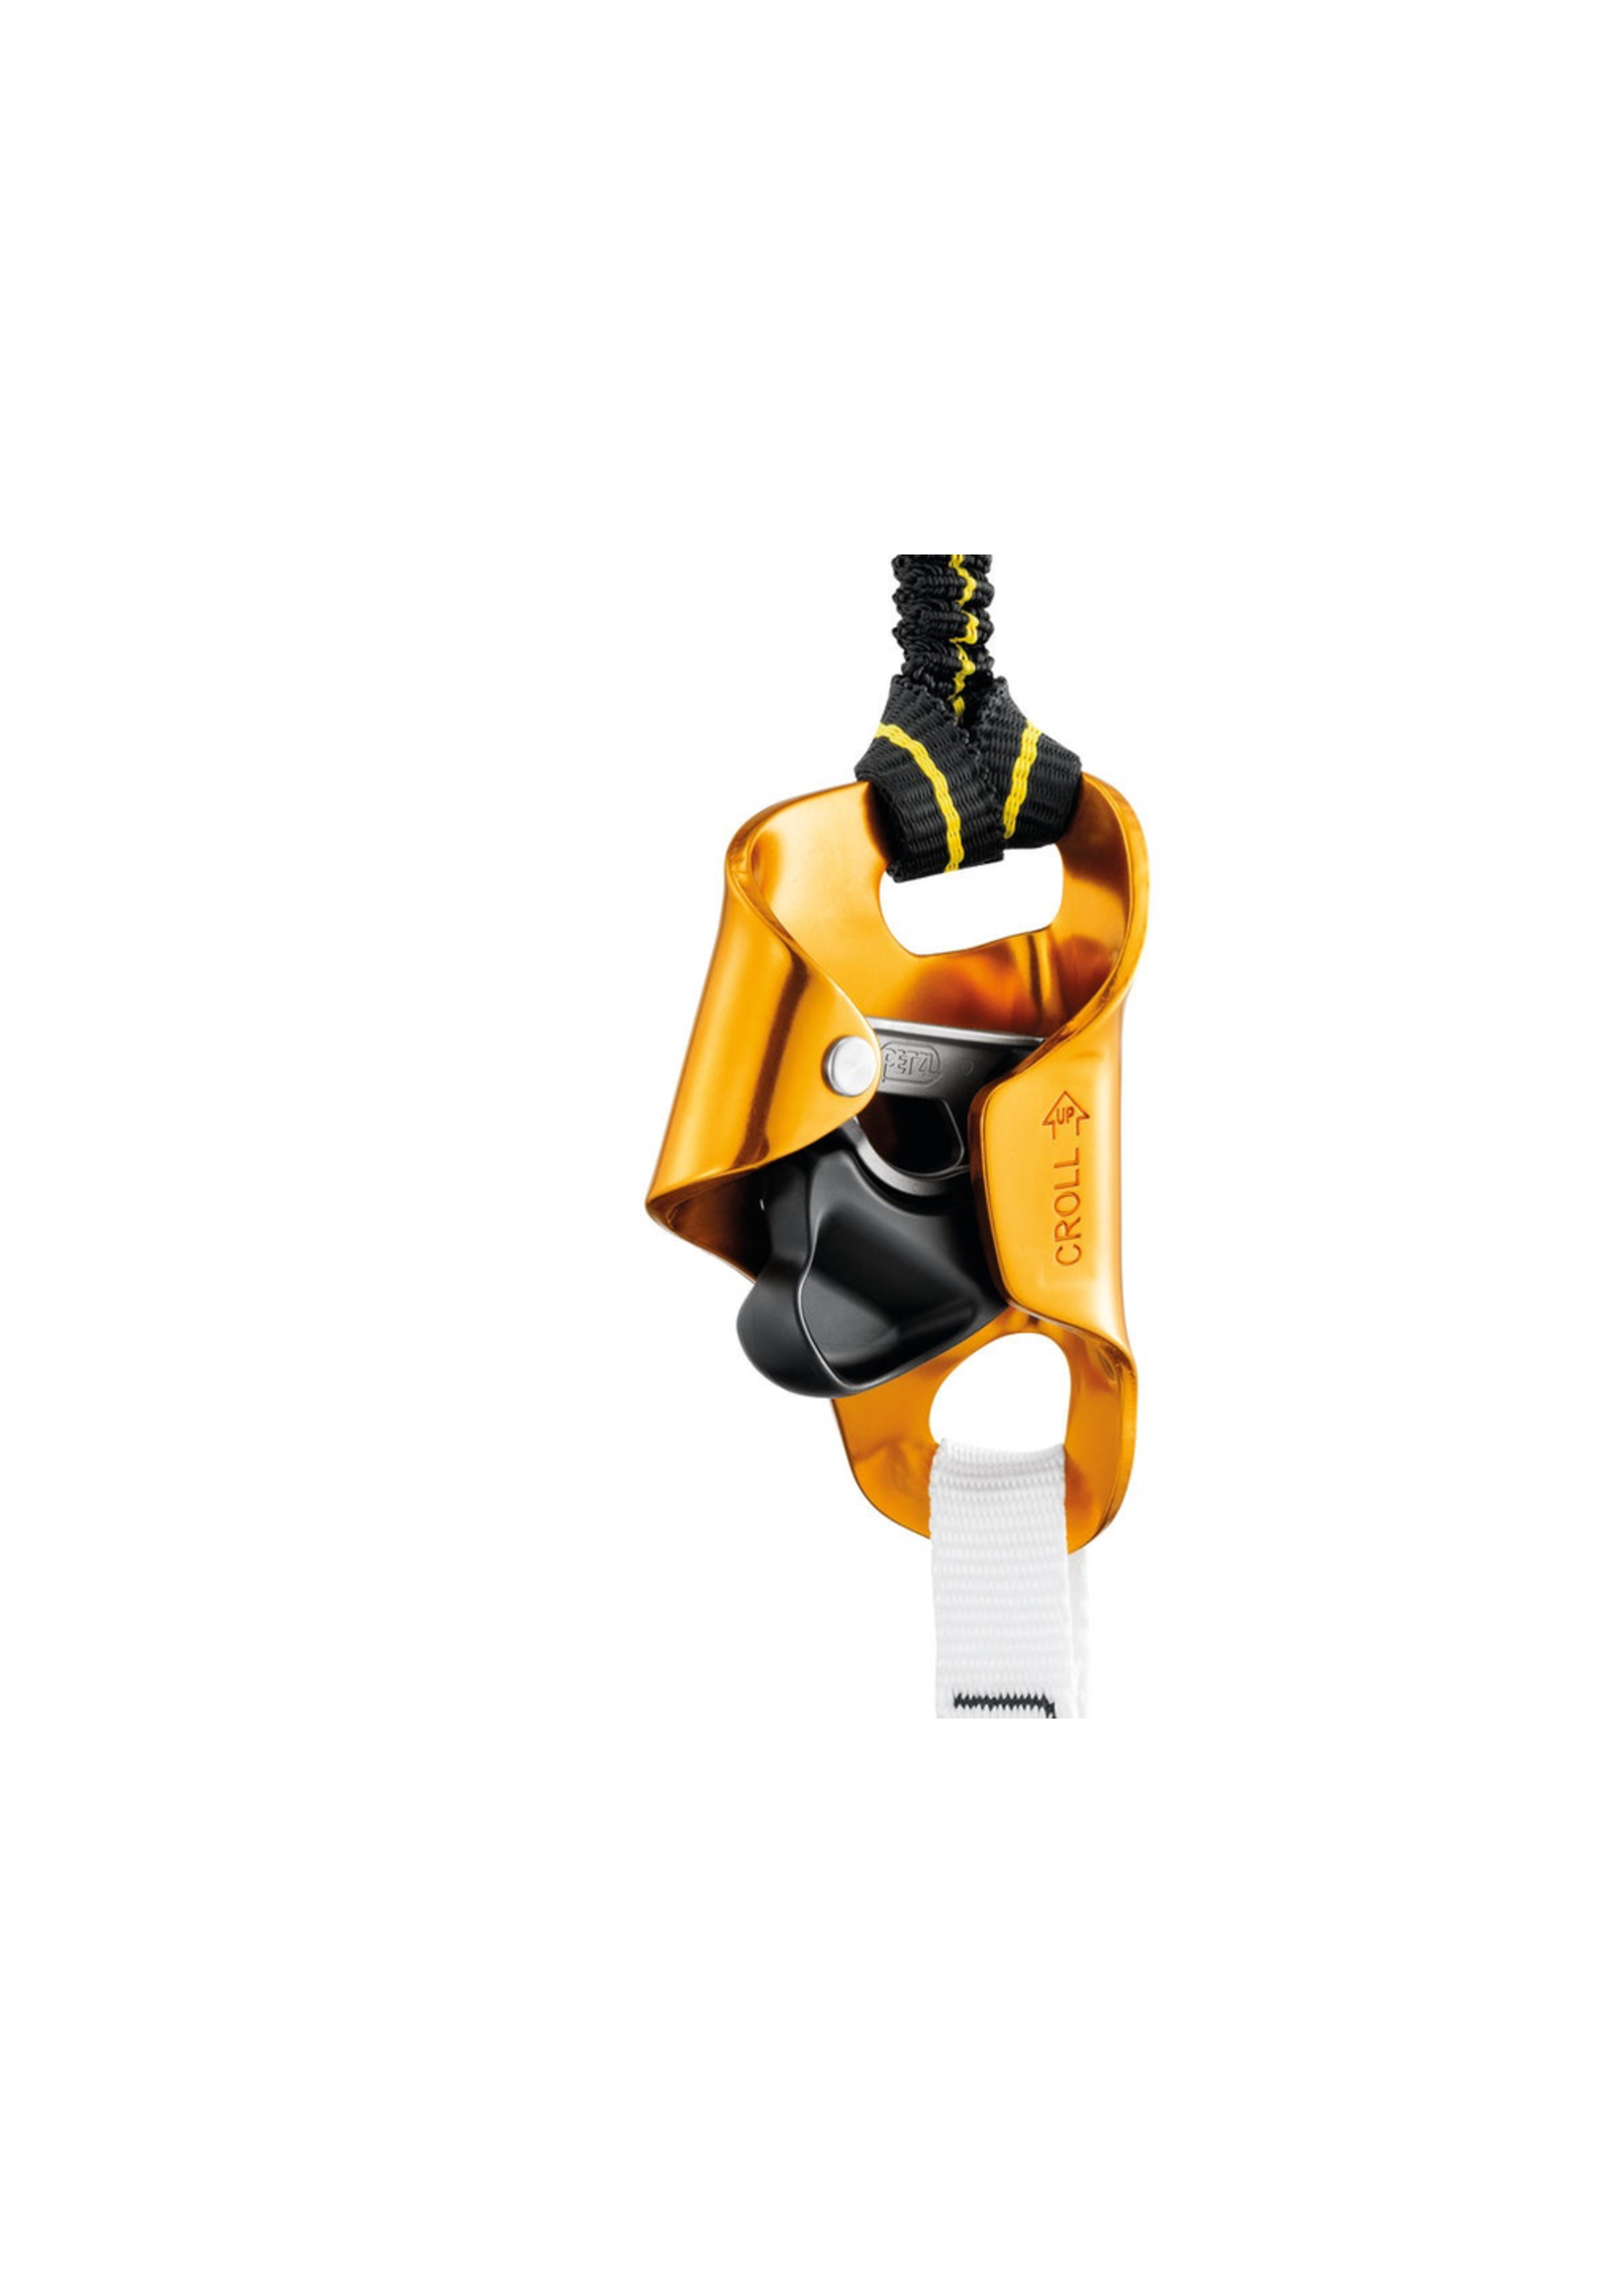 Petzl Knee Ascent Clip, Knee Ascender Assembly with Clip for Boot